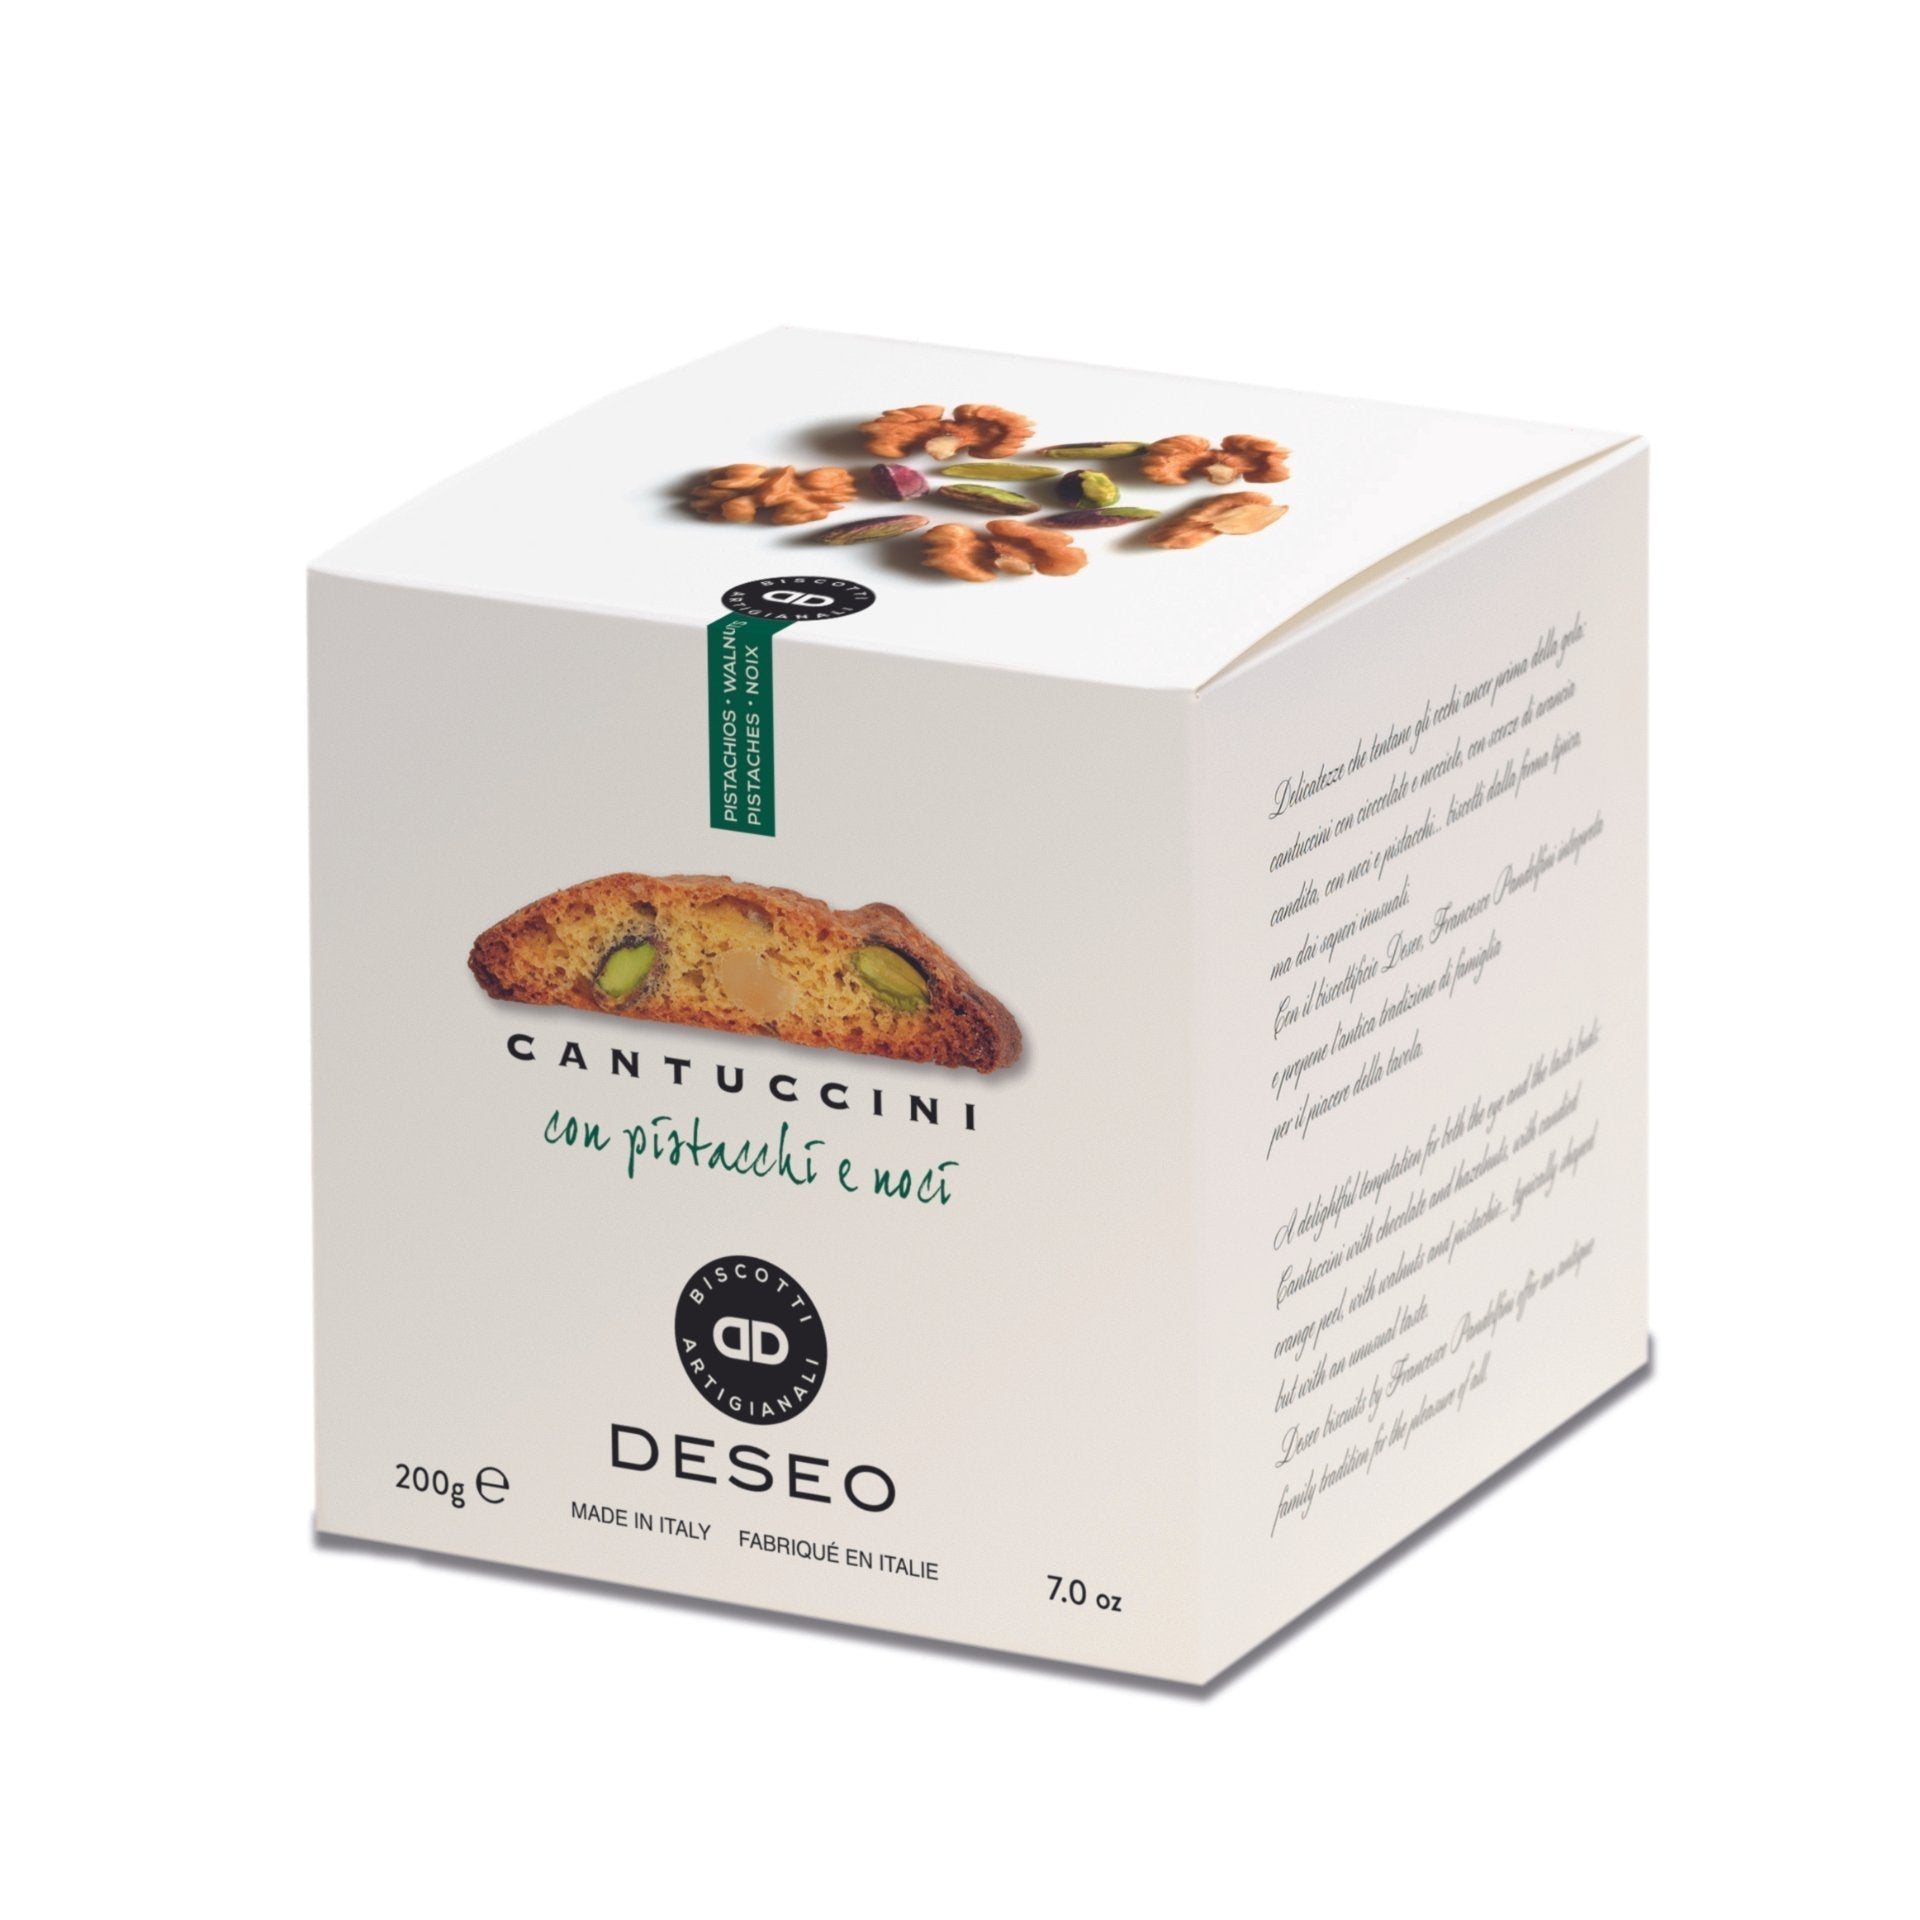 Deseo Cantuccini Toscani with Pistachios & Walnuts 200g (Box)  | Imported and distributed in the UK by Just Gourmet Foods